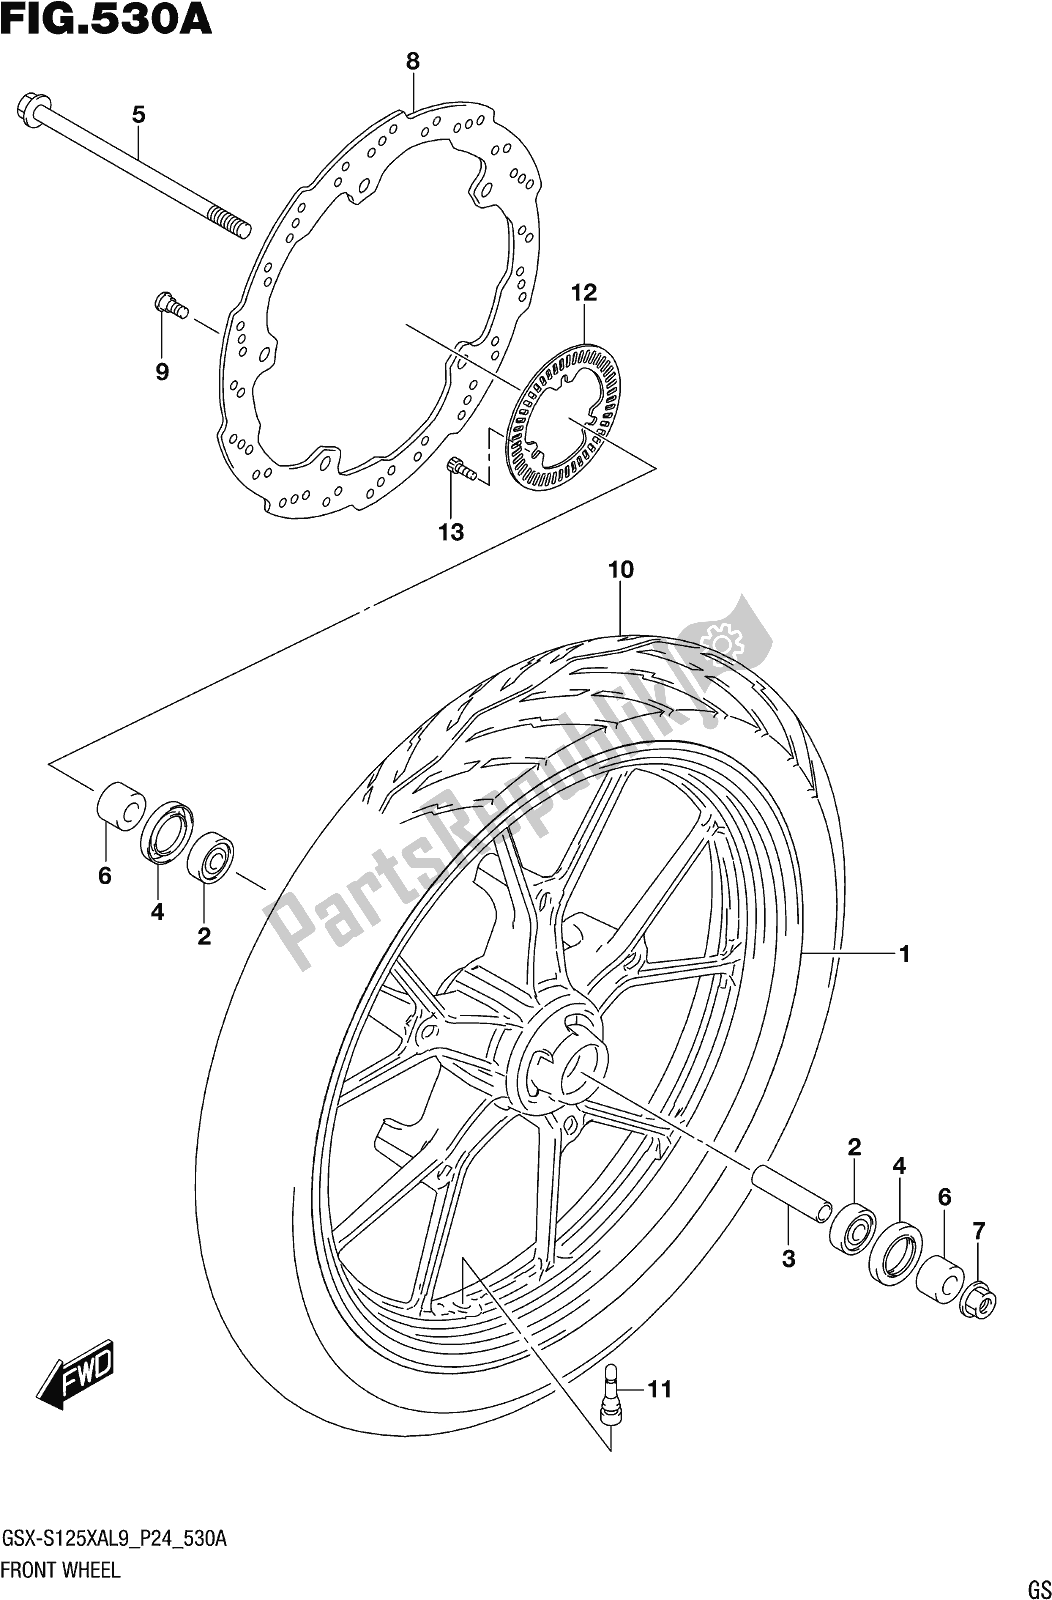 All parts for the Fig. 530a Front Wheel of the Suzuki Gsx-s 125 XA 2019